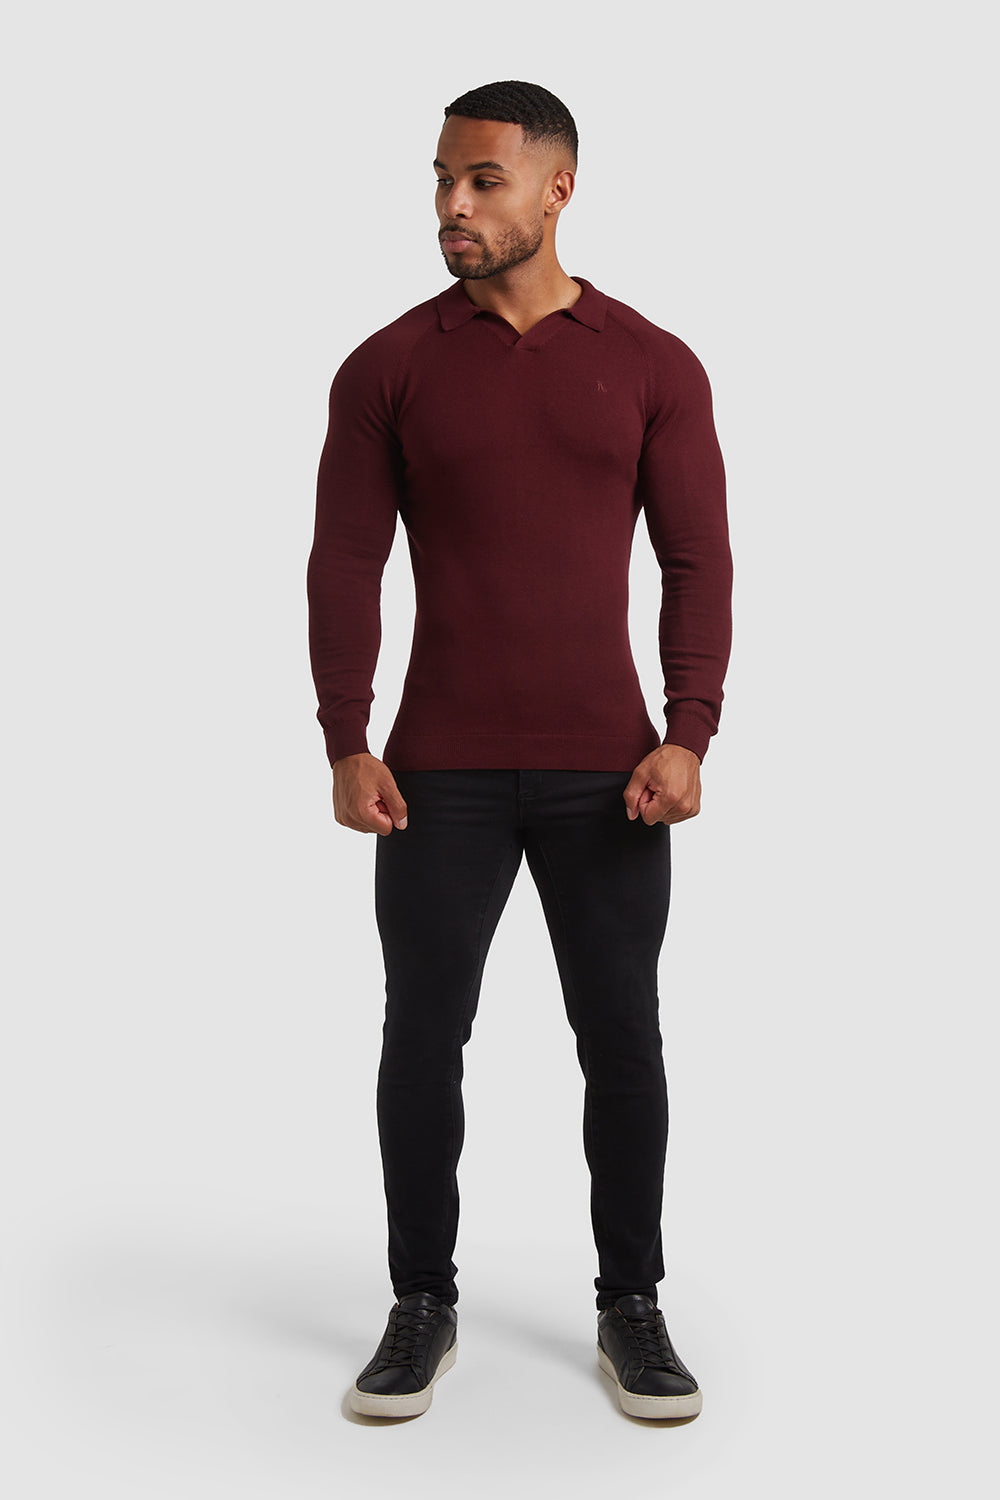 Buttonless Open Collar Polo Shirt (LS) in Claret - TAILORED ATHLETE - USA